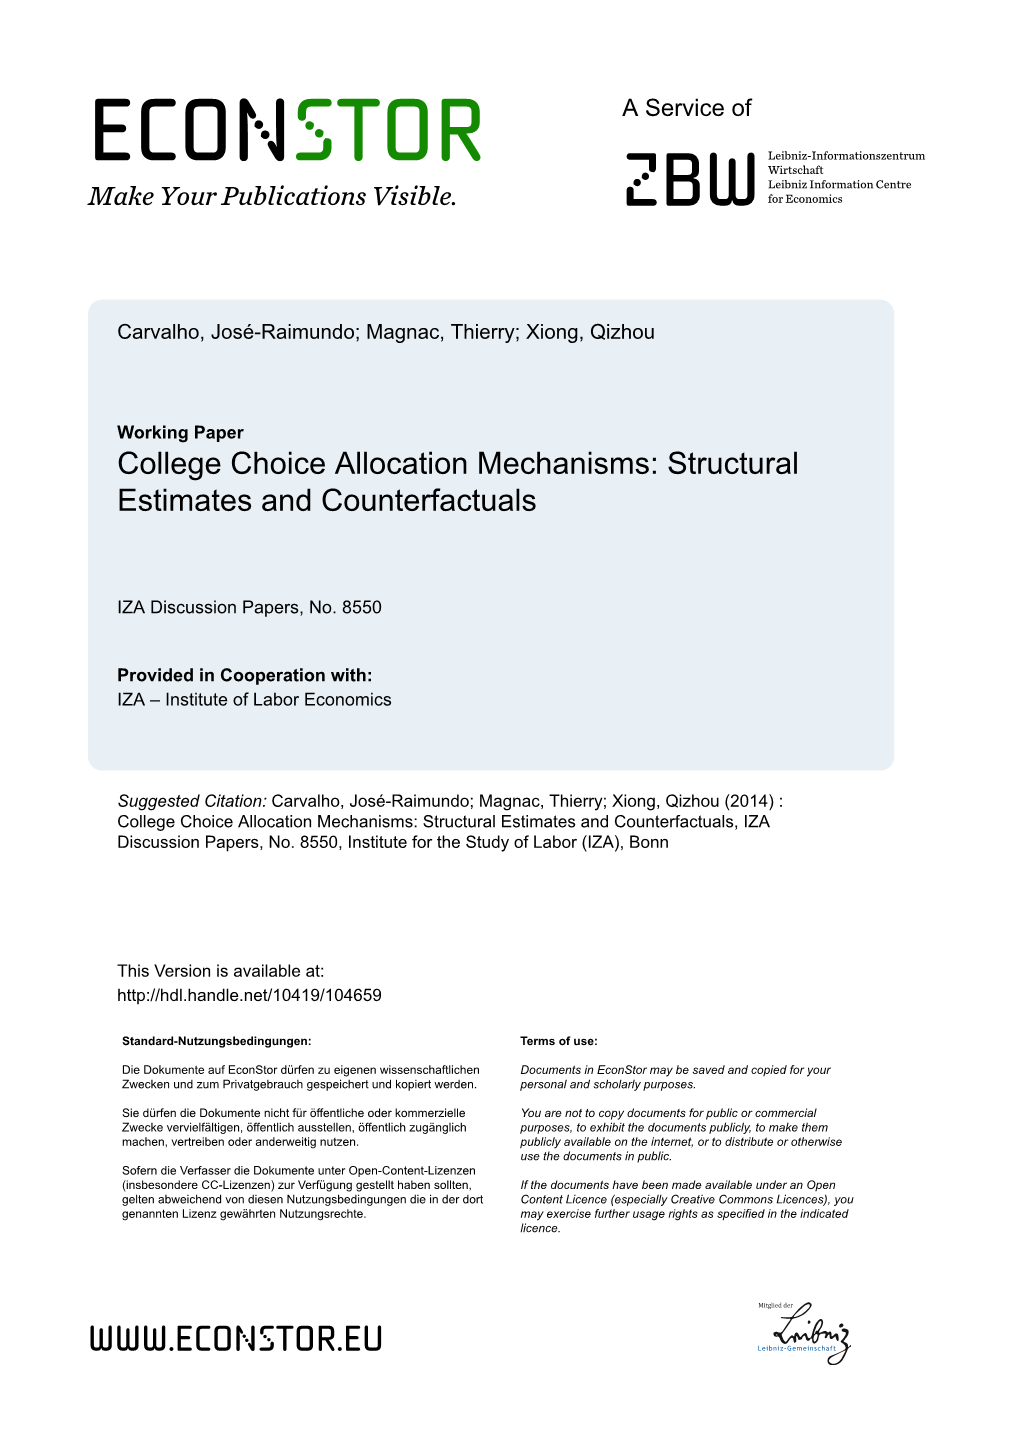 College Choice Allocation Mechanisms: Structural Estimates and Counterfactuals